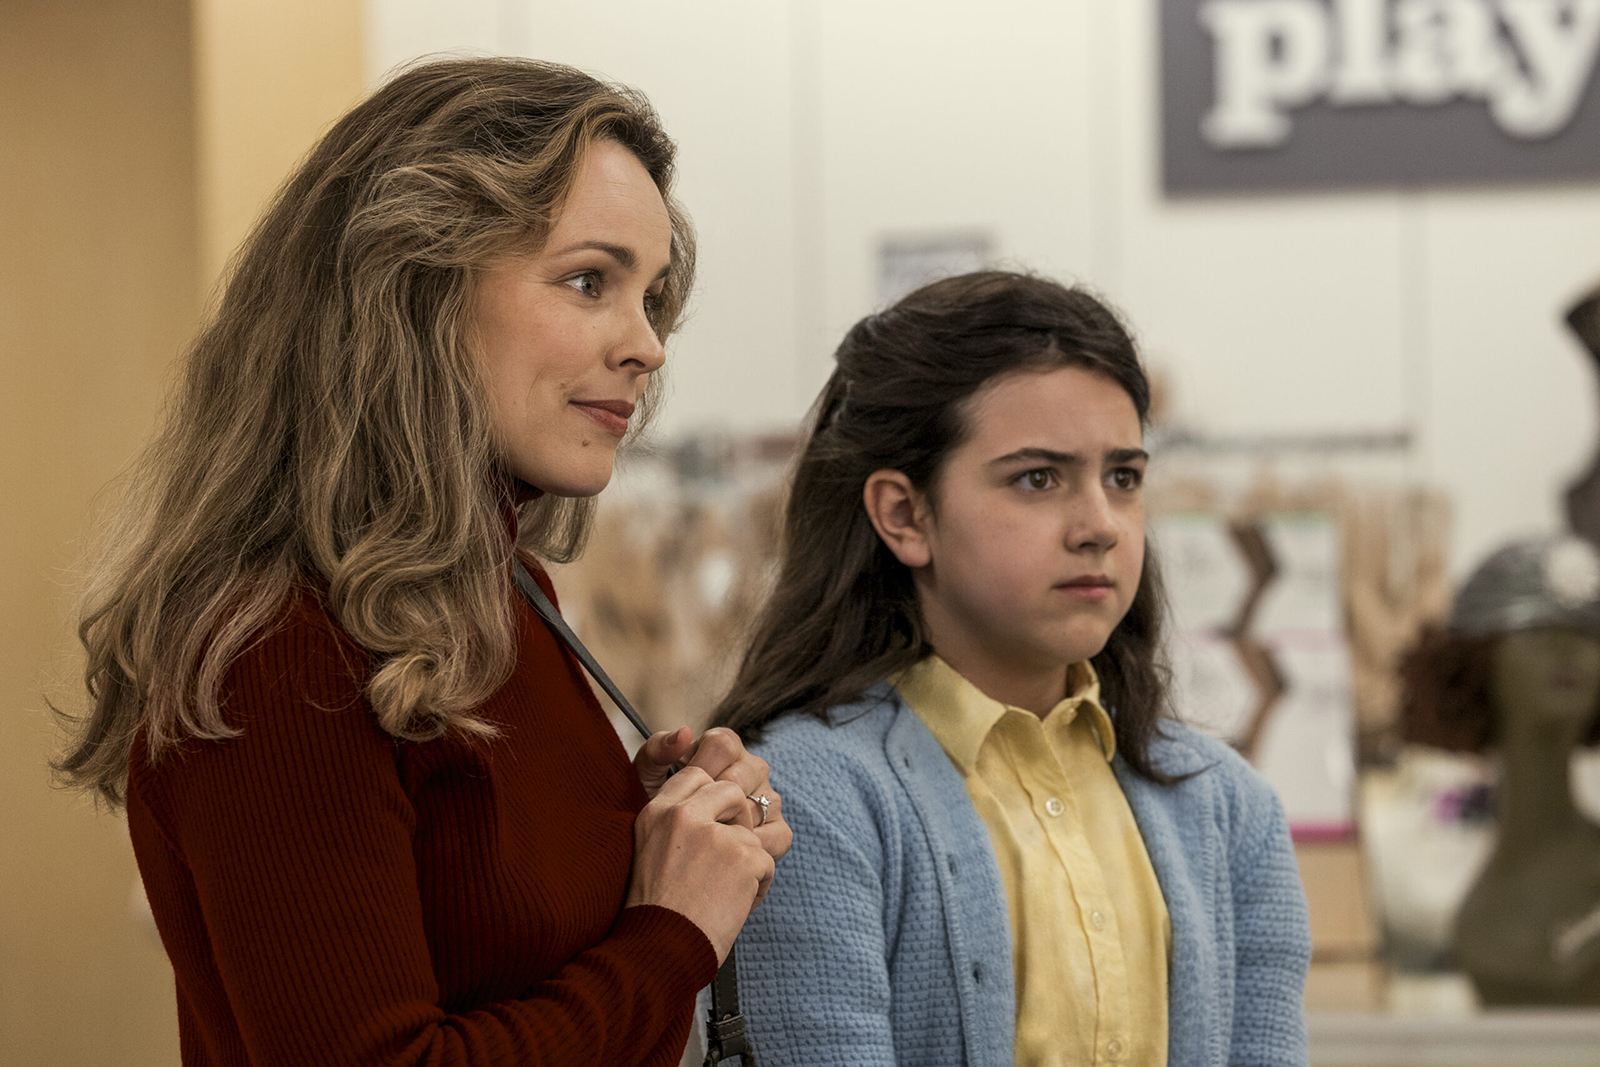 Actots Rachel McAdams, left, and Abby Ryder Fortson in the film adaptation of "Are You There God? It’s Me, Margaret." Photo by Dana Hawley/Lionsgate